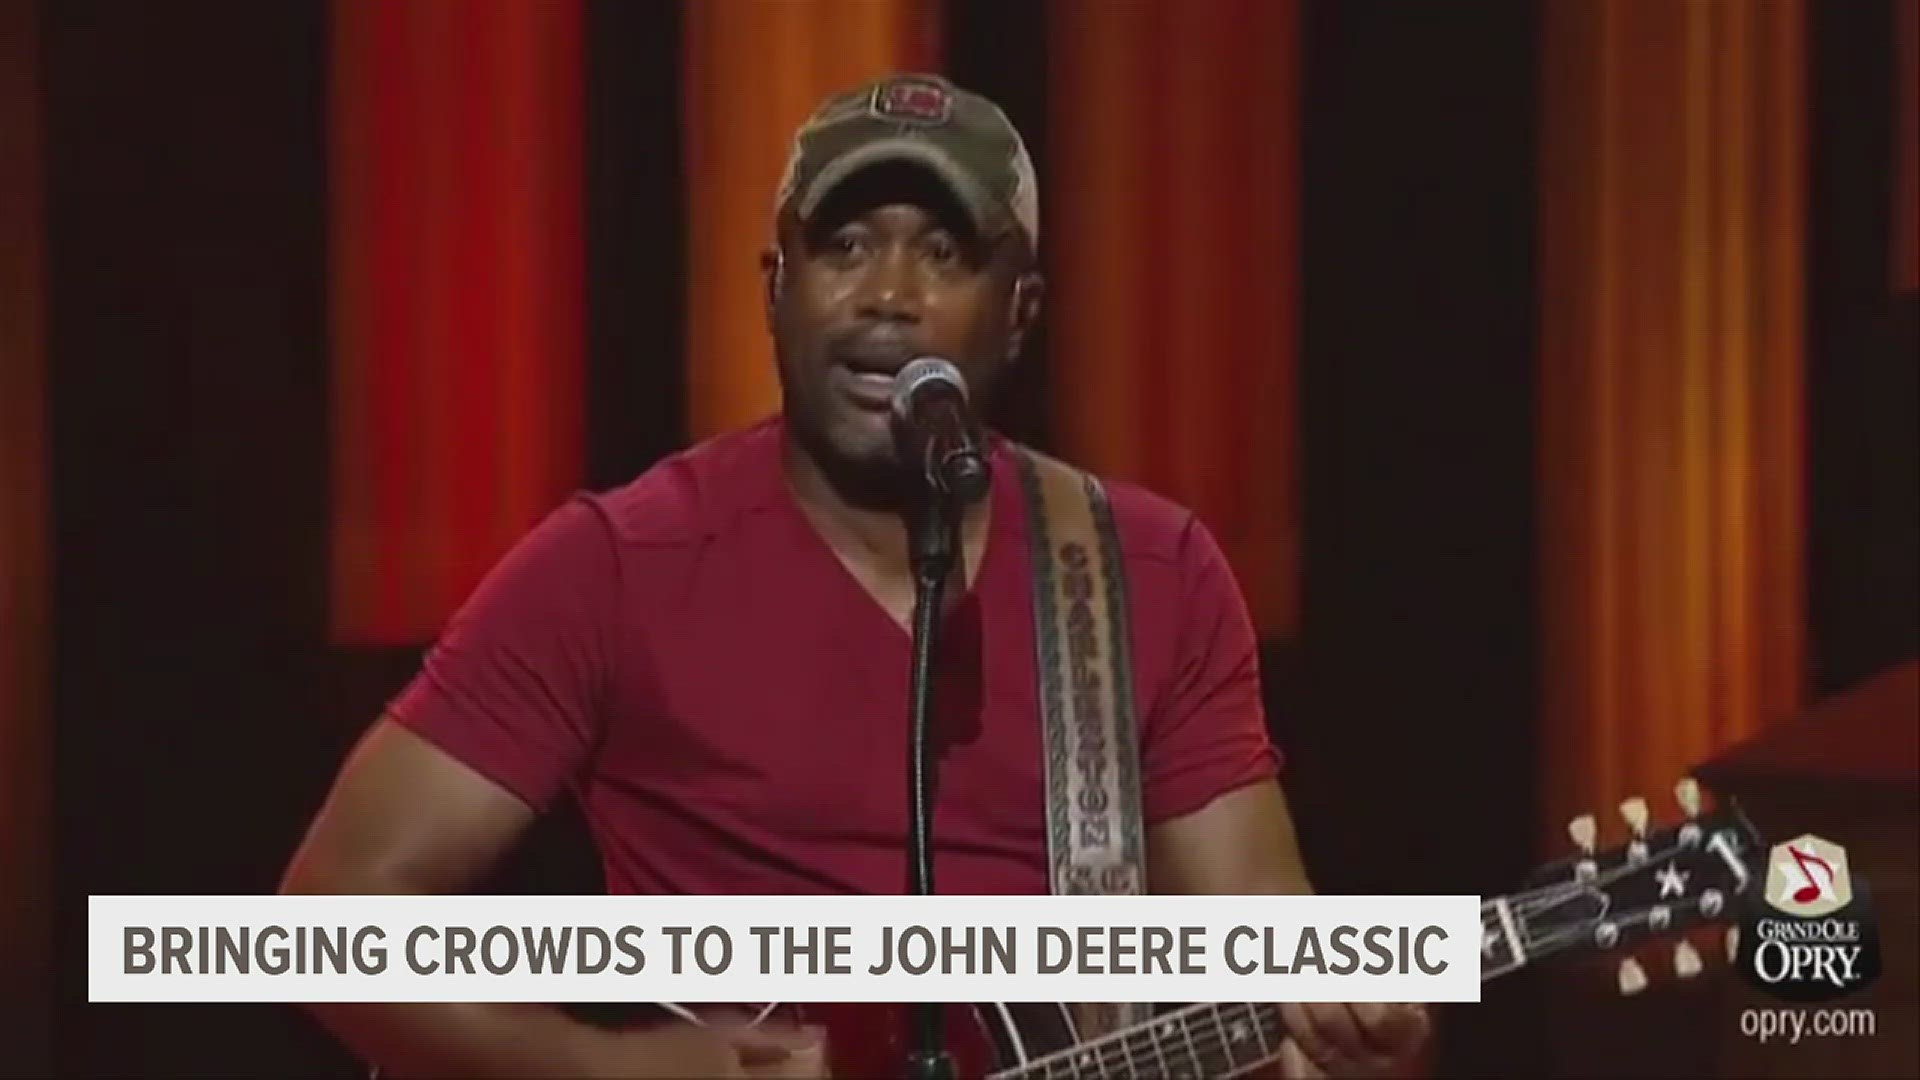 The Grammy award-winning artists Darius Rucker and Blake Shelton will be bringing back concerts to the Classic for 2023.